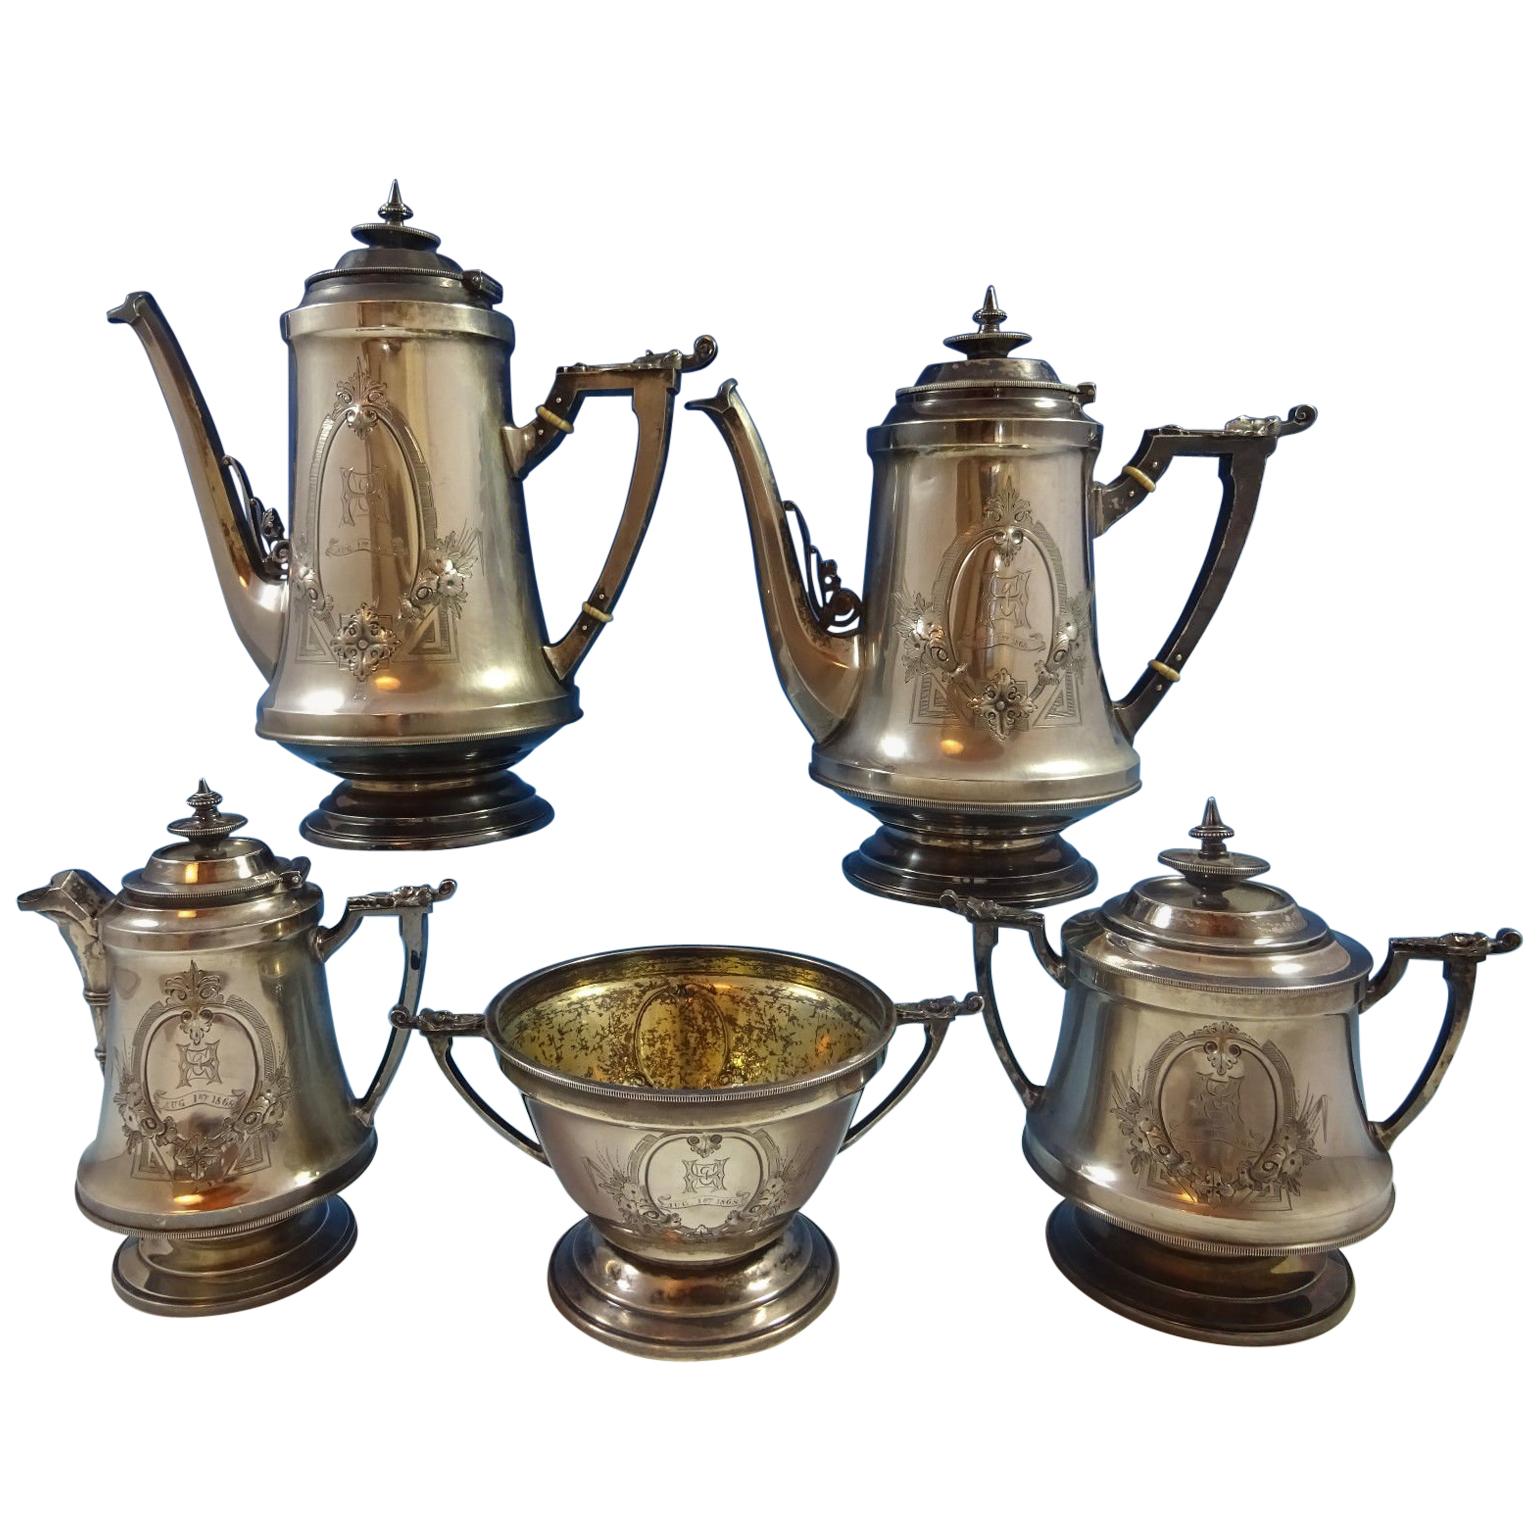 Wood and Hughes Coin Silver Tea Set 5-Piece Civil War Period with 3-D Elements